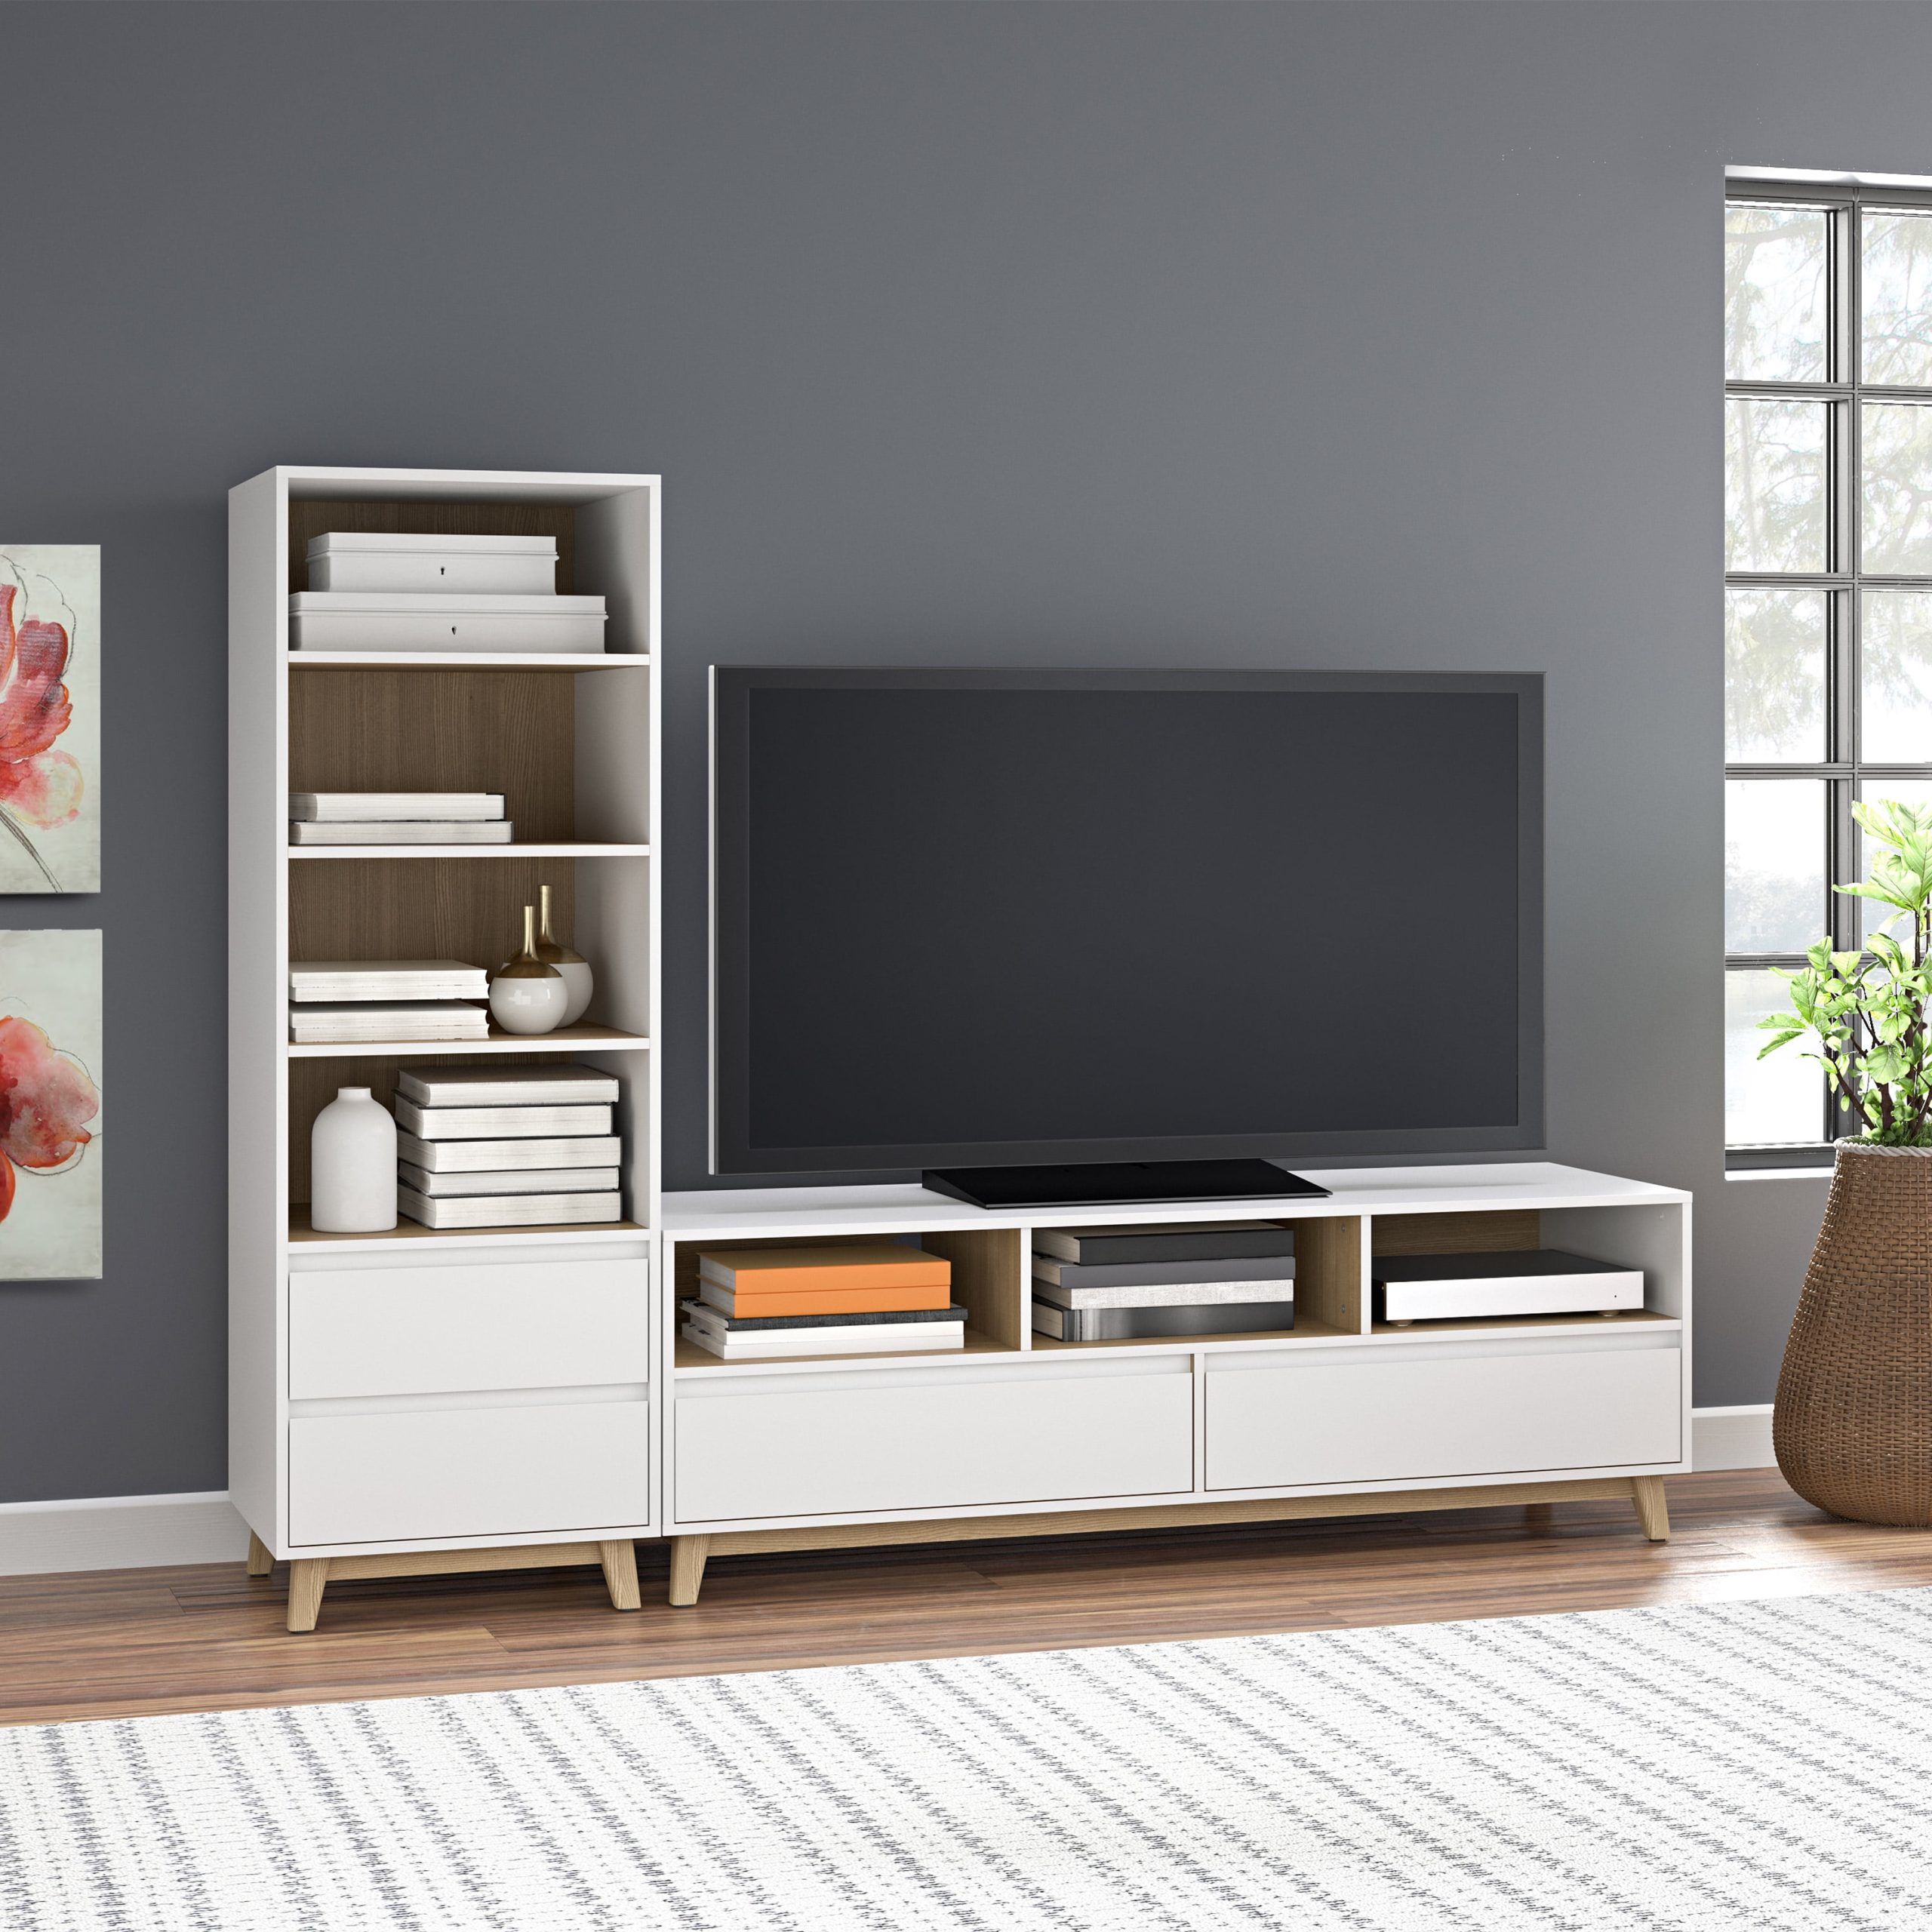 Modern Stands With Shelves Intended For Trendy Mainstays Mid Century Tv Stand And Tower Book Shelf – Walmart (View 6 of 15)